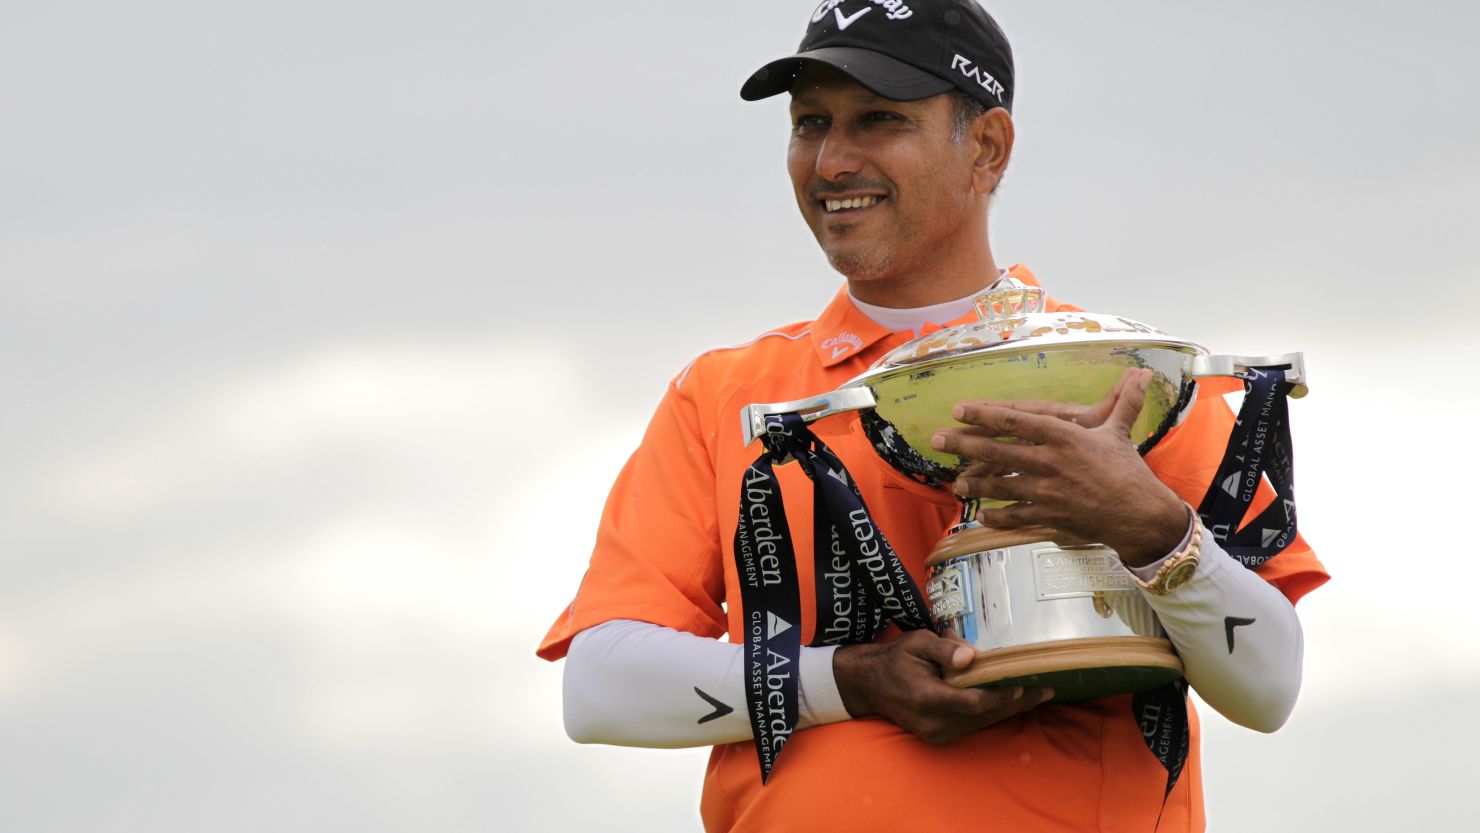 Jeev Milkha Singh cradles the Scottish Open trophy after beating Italy's Francesco Molinari in a playoff on Sunday